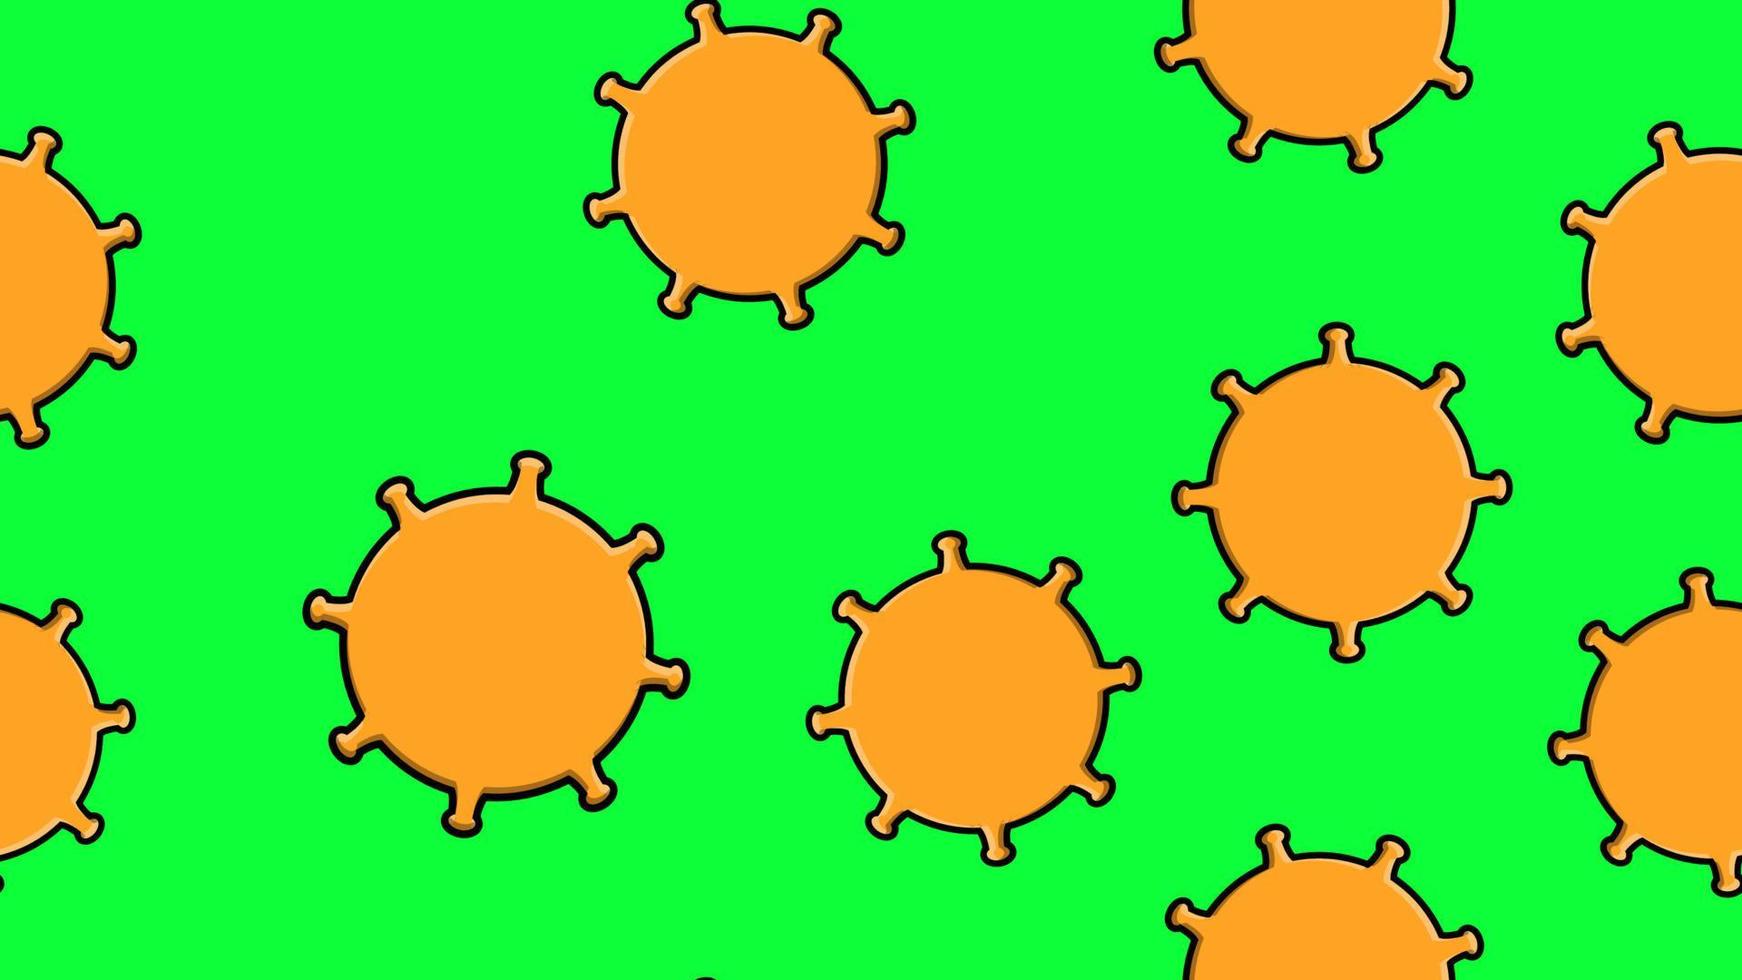 Endless seamless pattern of yellow dangerous infectious deadly respiratory coronaviruses pandemic epidemic, Covid-19 microbe viruses causing pneumonia on a green background vector